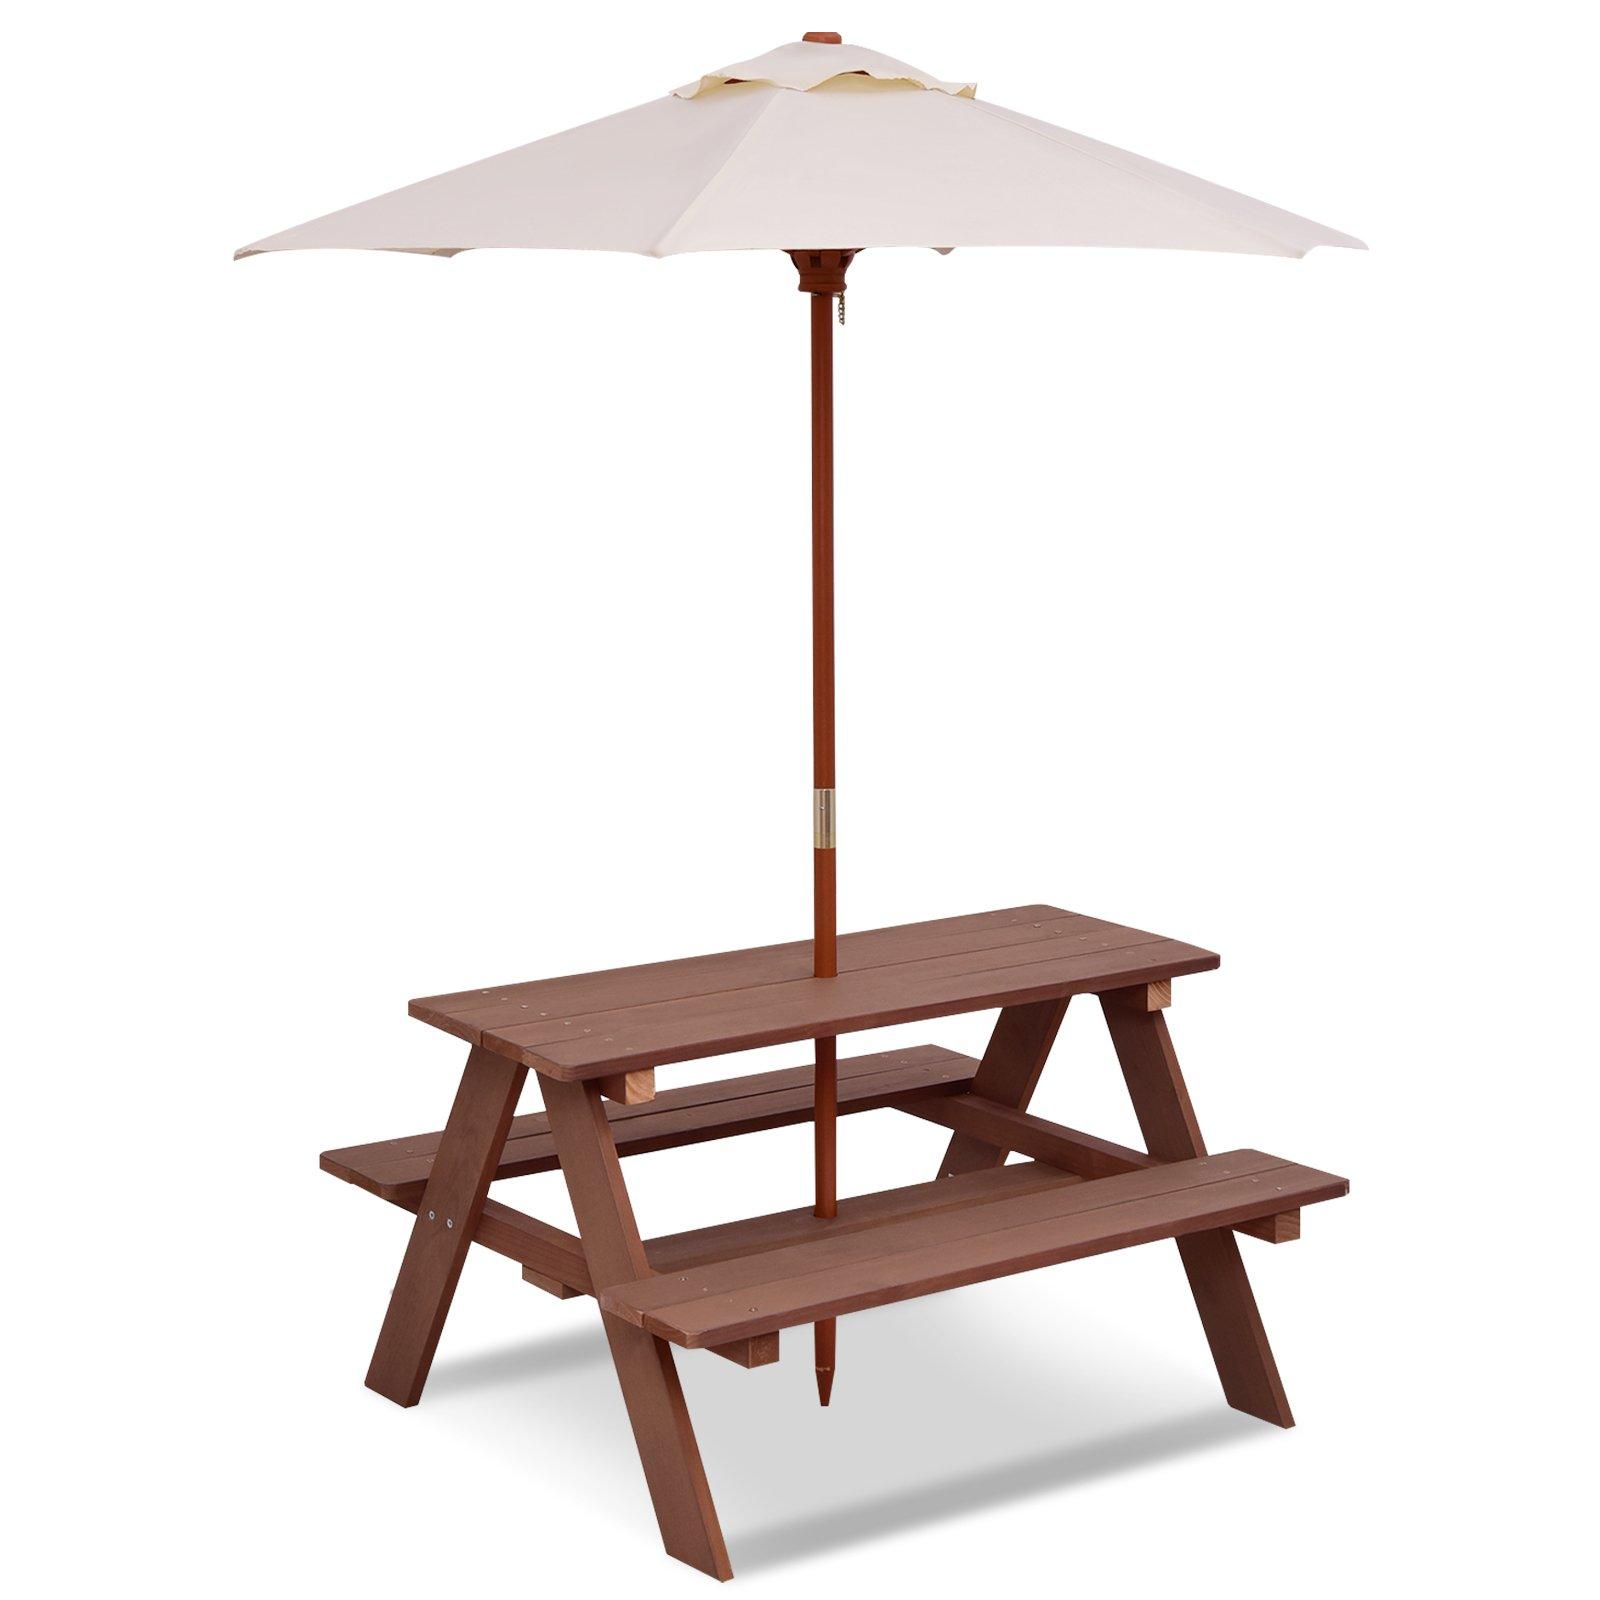 3 in 1 Kids Picnic Table Children Outdoor Activity Table w/ Removable Umbrella